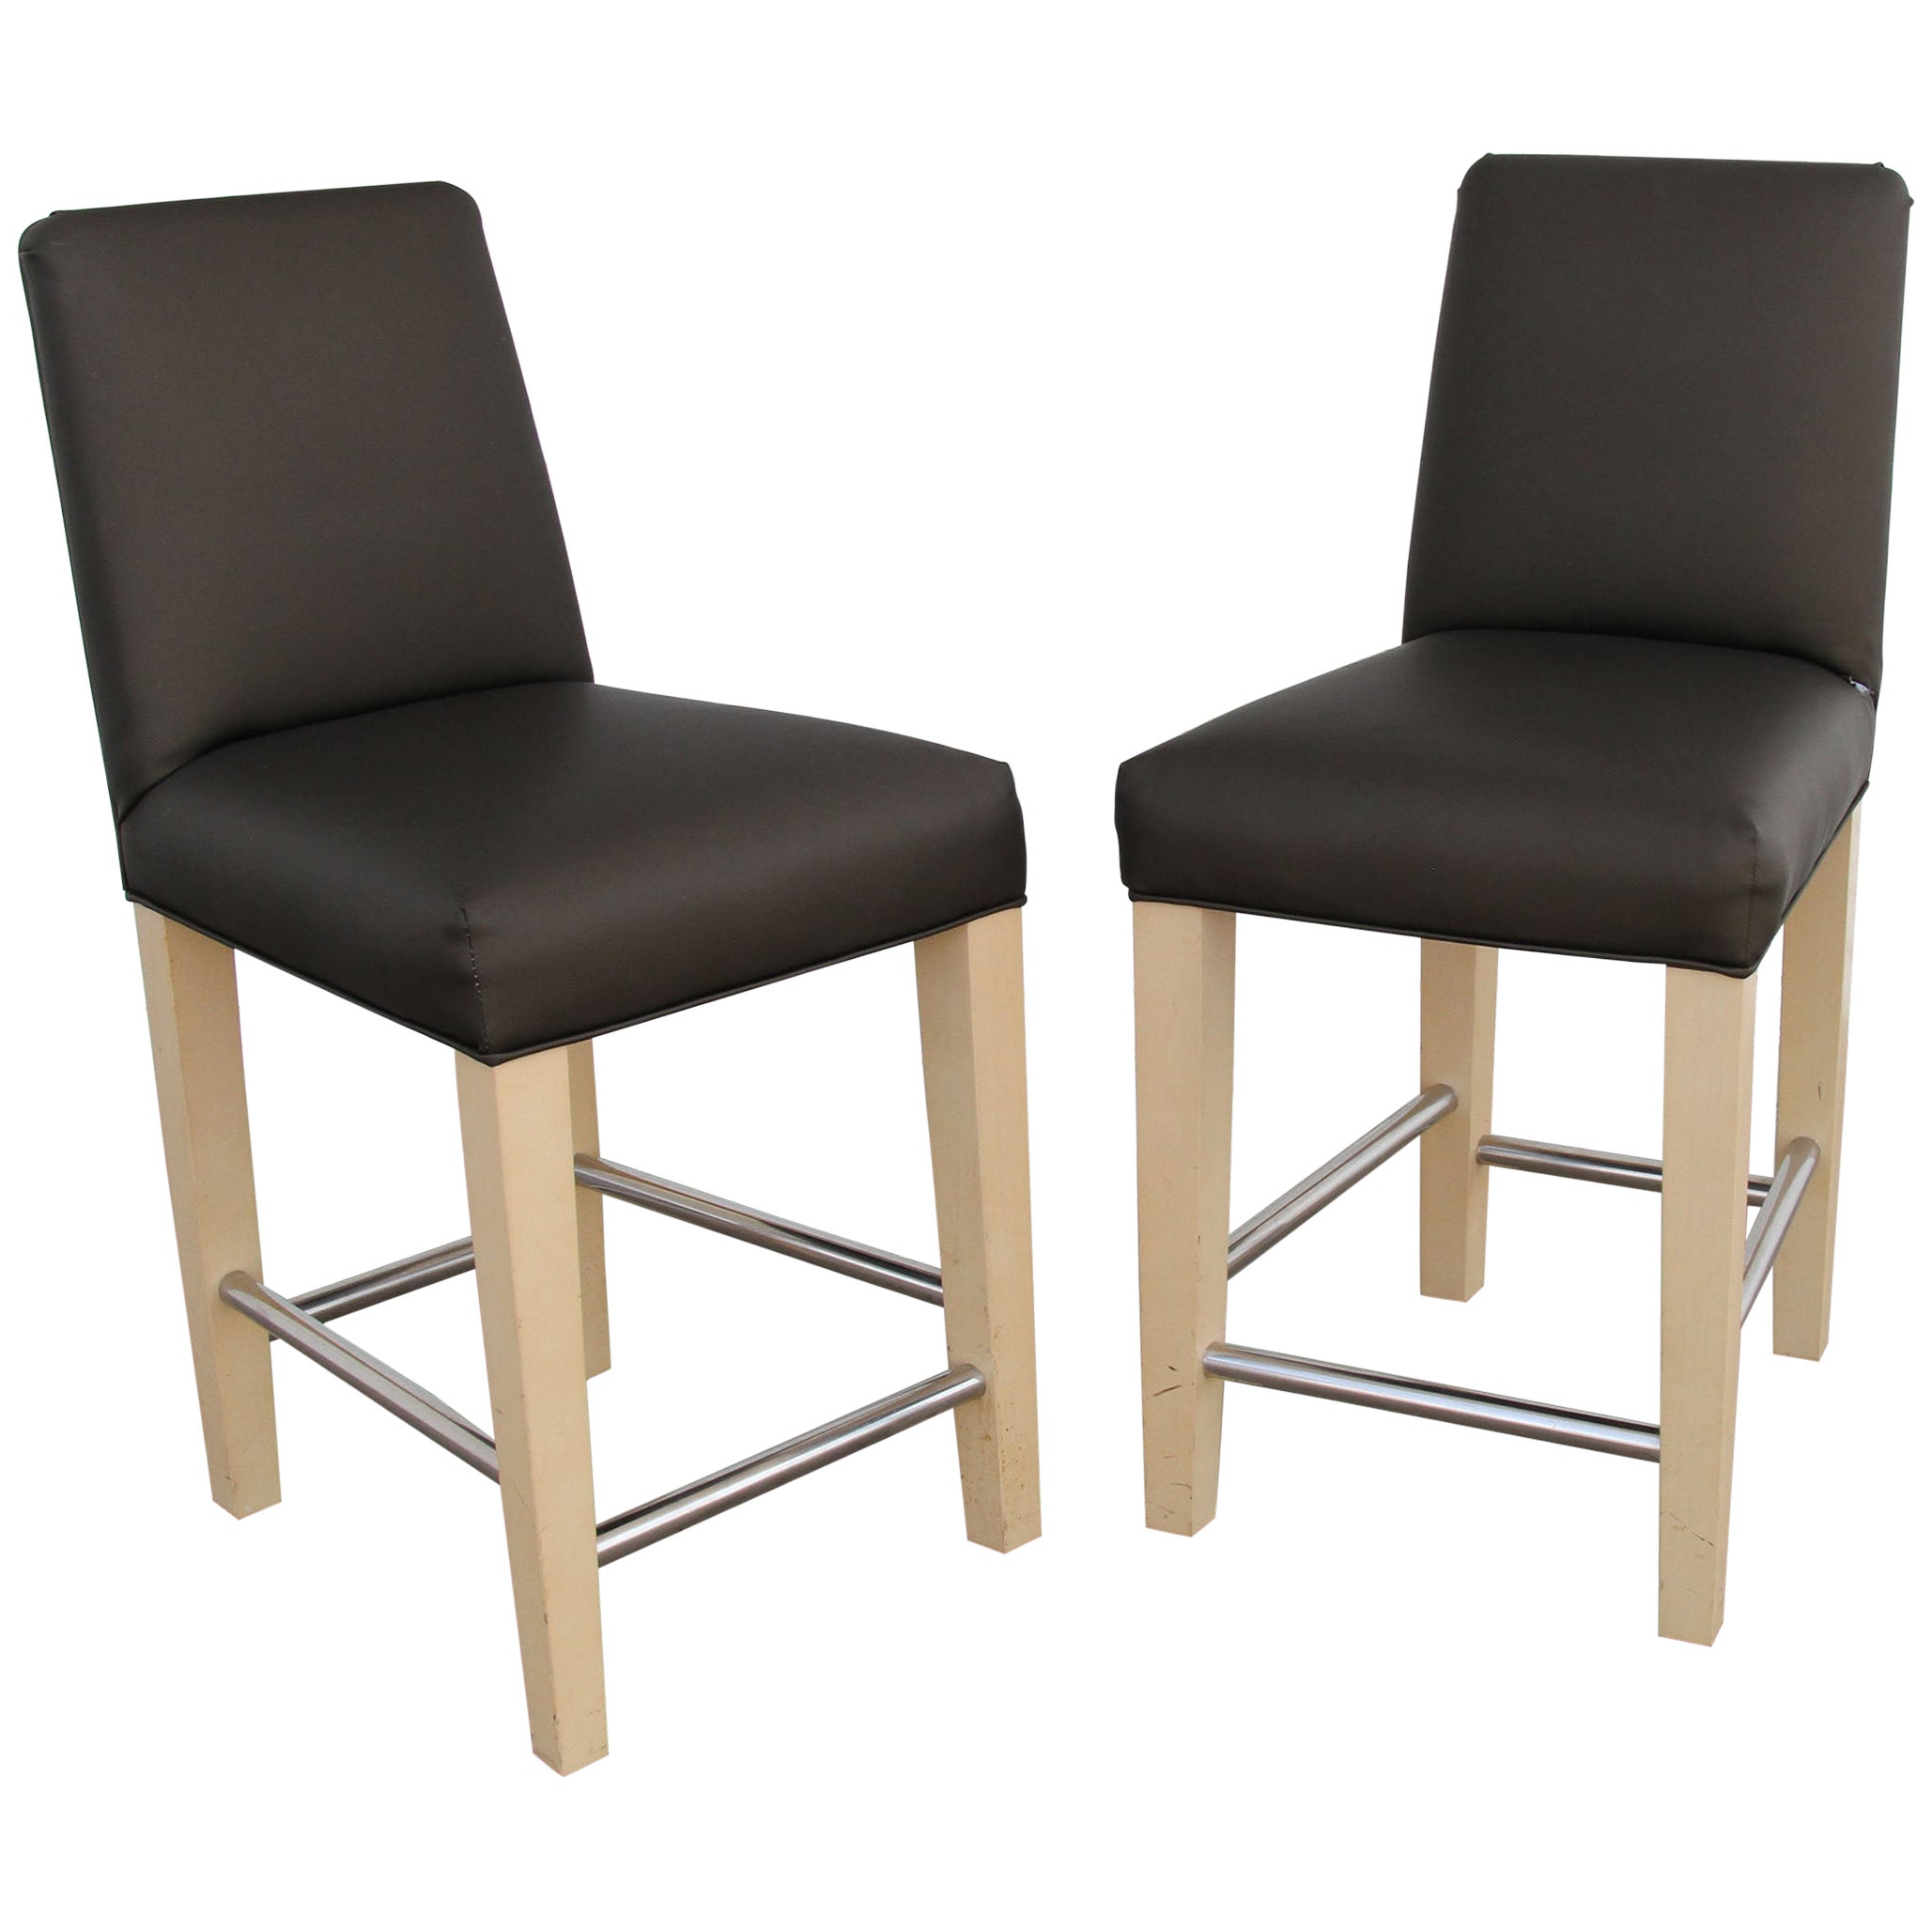 Pair of Counter Stools by R Jones of Dallas